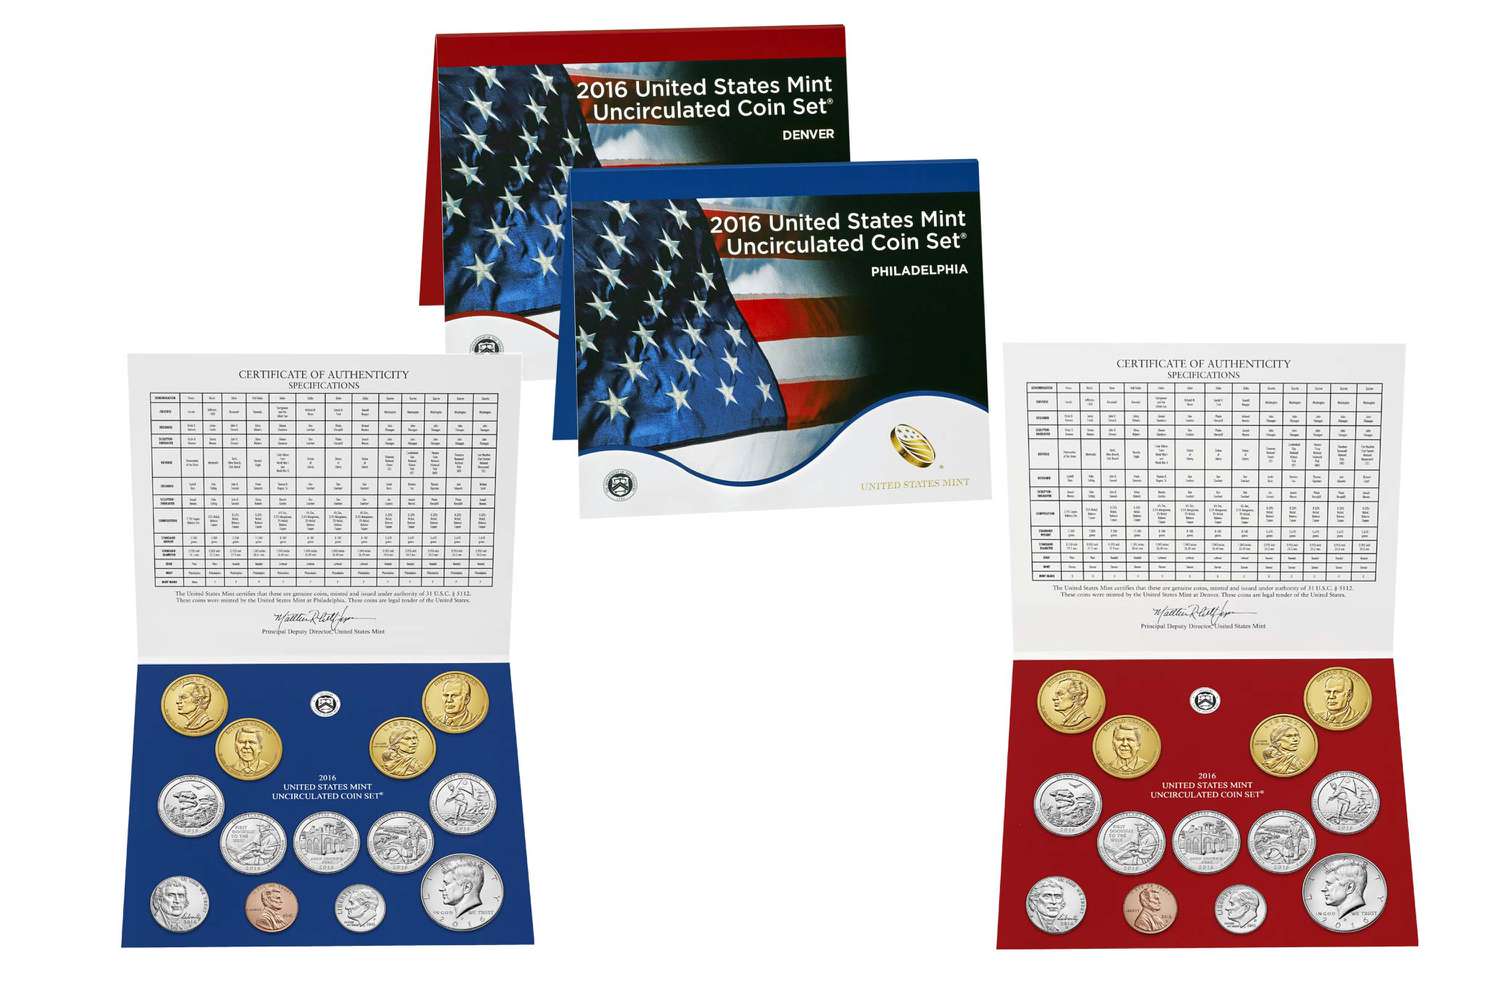 2016 United States Mint Uncirculated Coin Sets